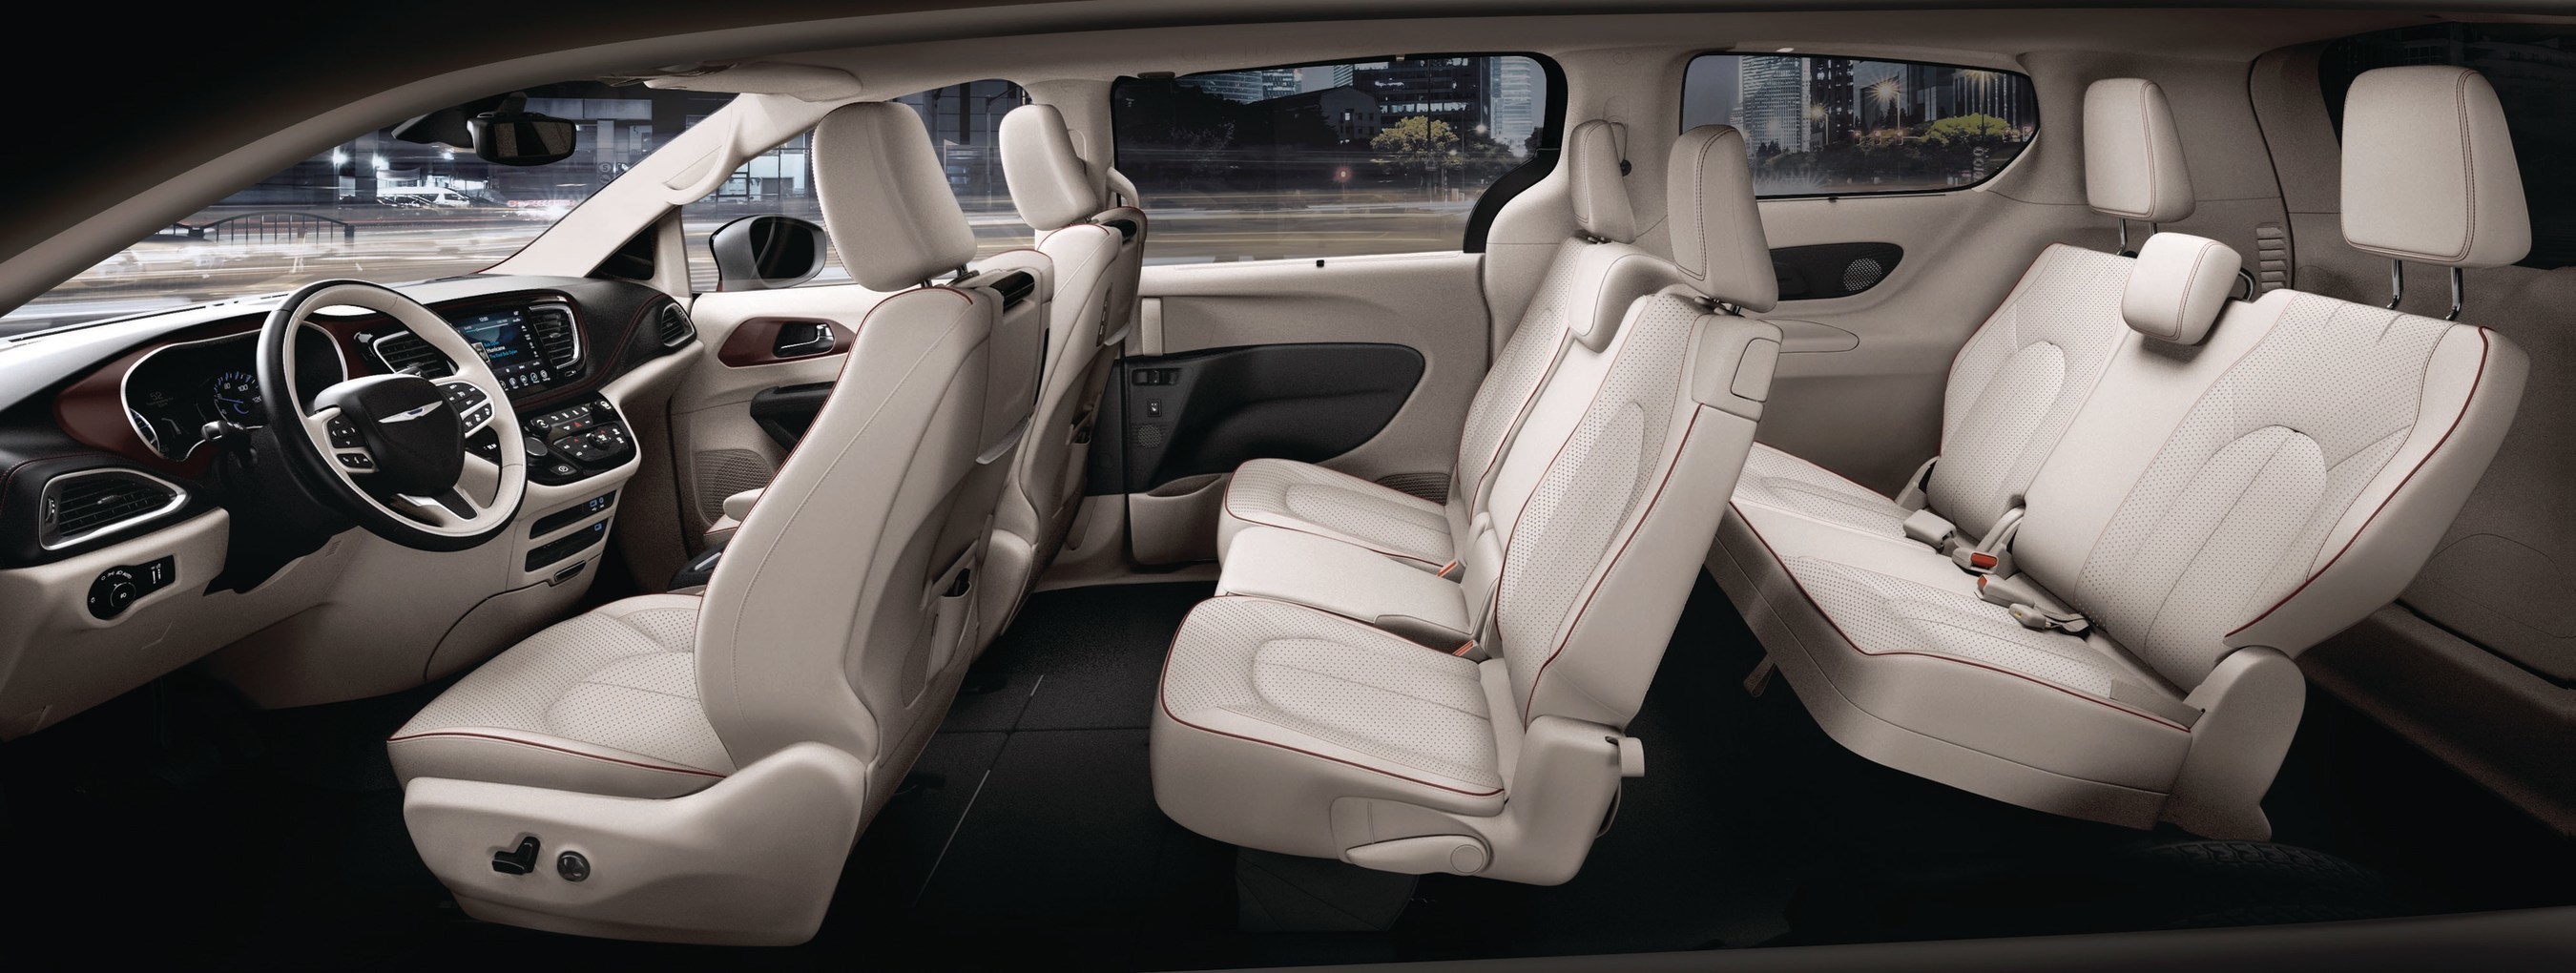 Magna Innovation Helps Shape Form And Function Of Award Winning 2017 Chrysler Pacifica Interior